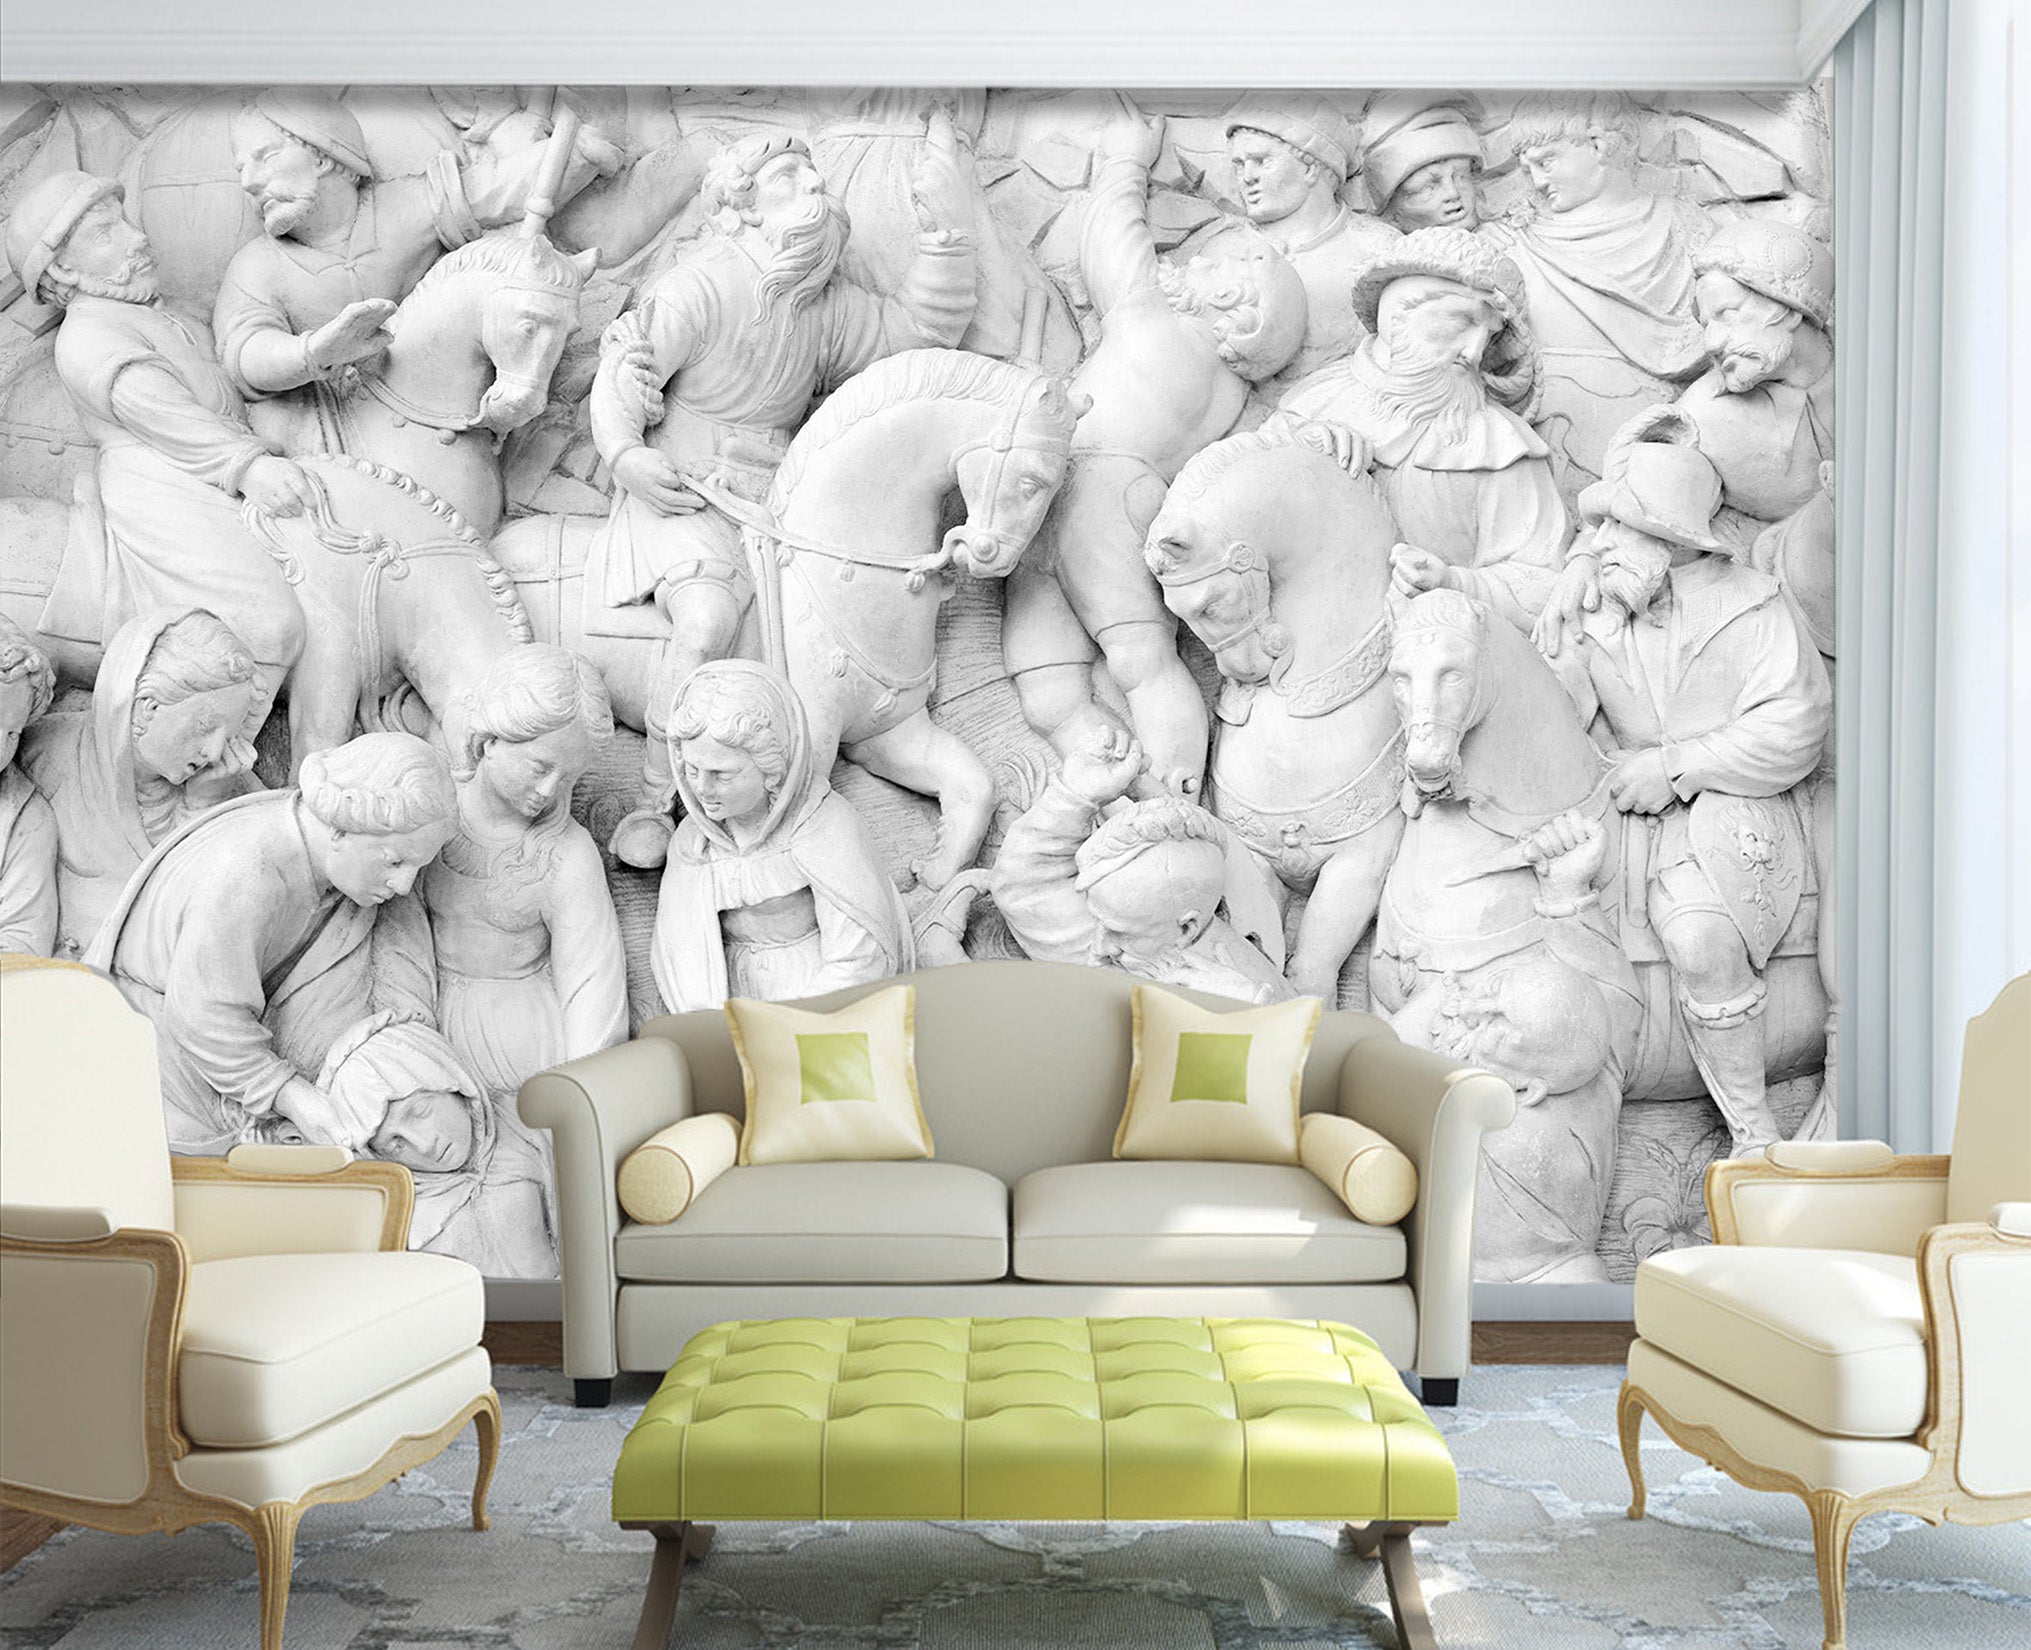 3D Carving People 1594 Wall Murals